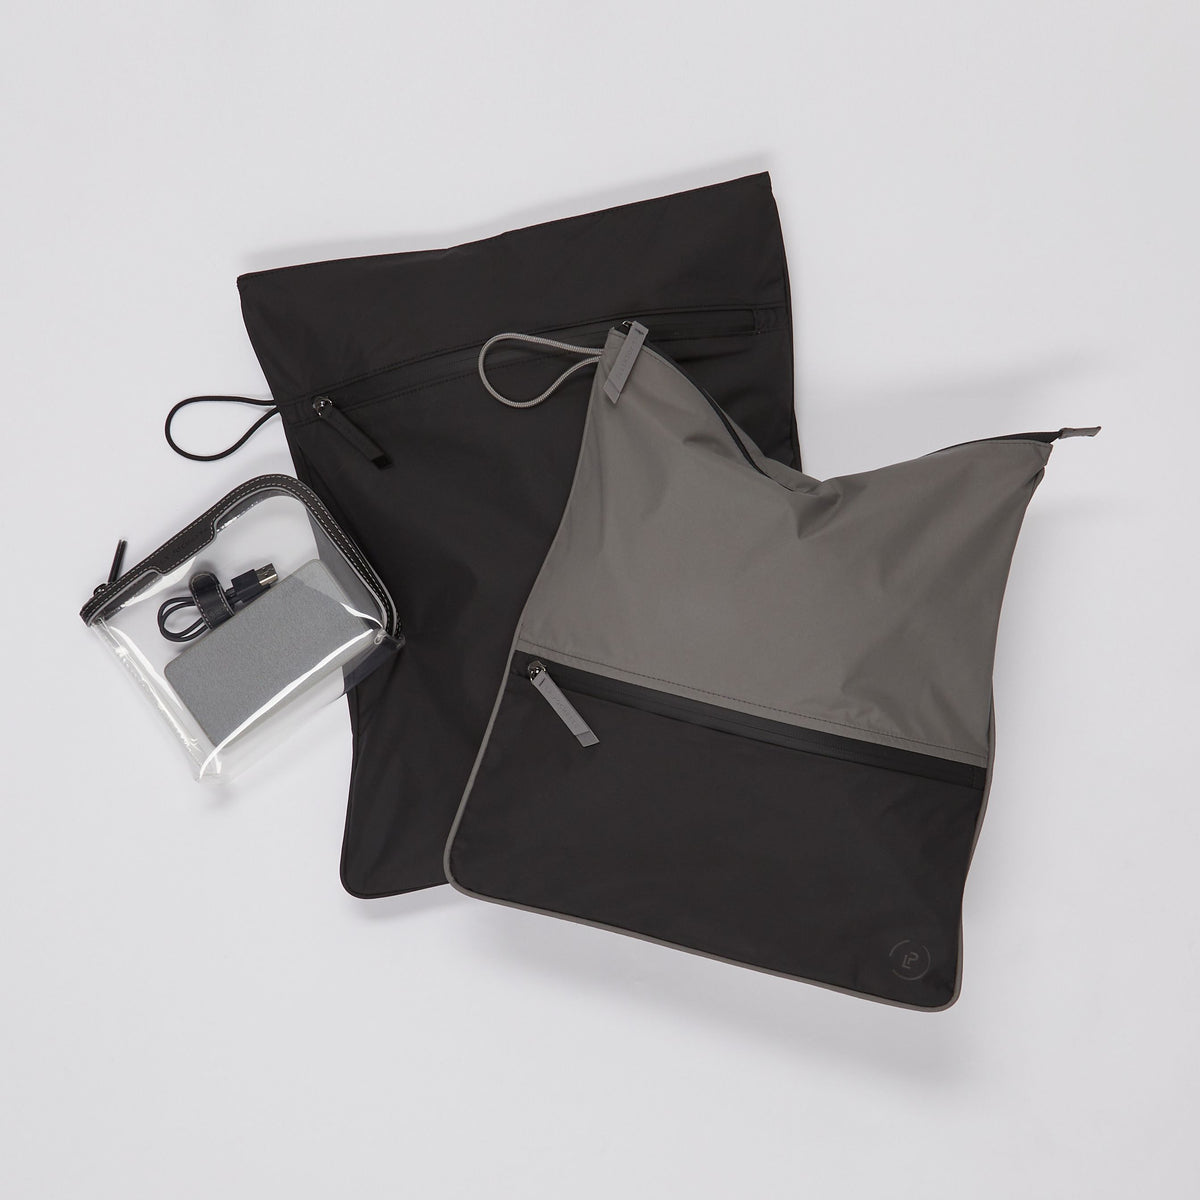 Pewter Ink Sweat Bag laid flat, topped with a small La Pochette Anywhere Everything Bag and La Pochette kit bag